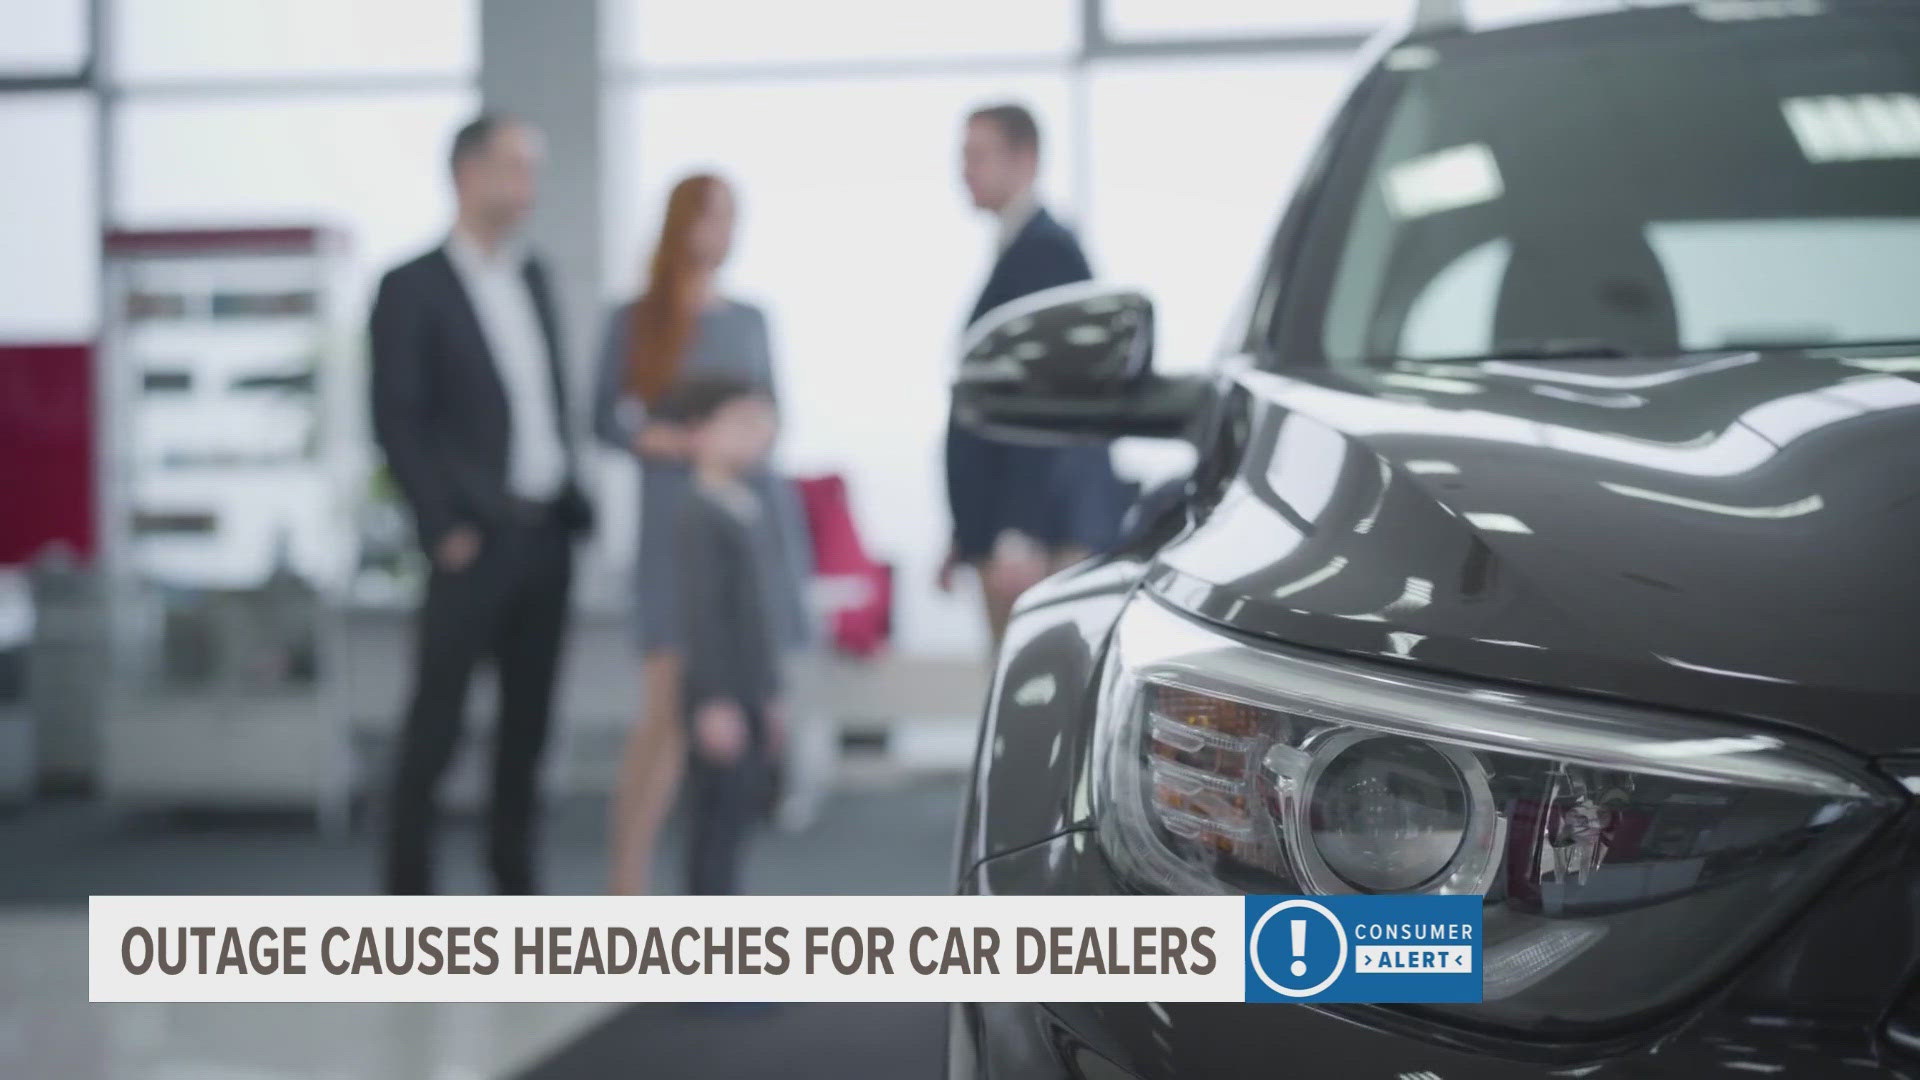 According to experts, the CDK Global outage is causing headaches for car dealerships across the country, impacting things like sales and repairs.